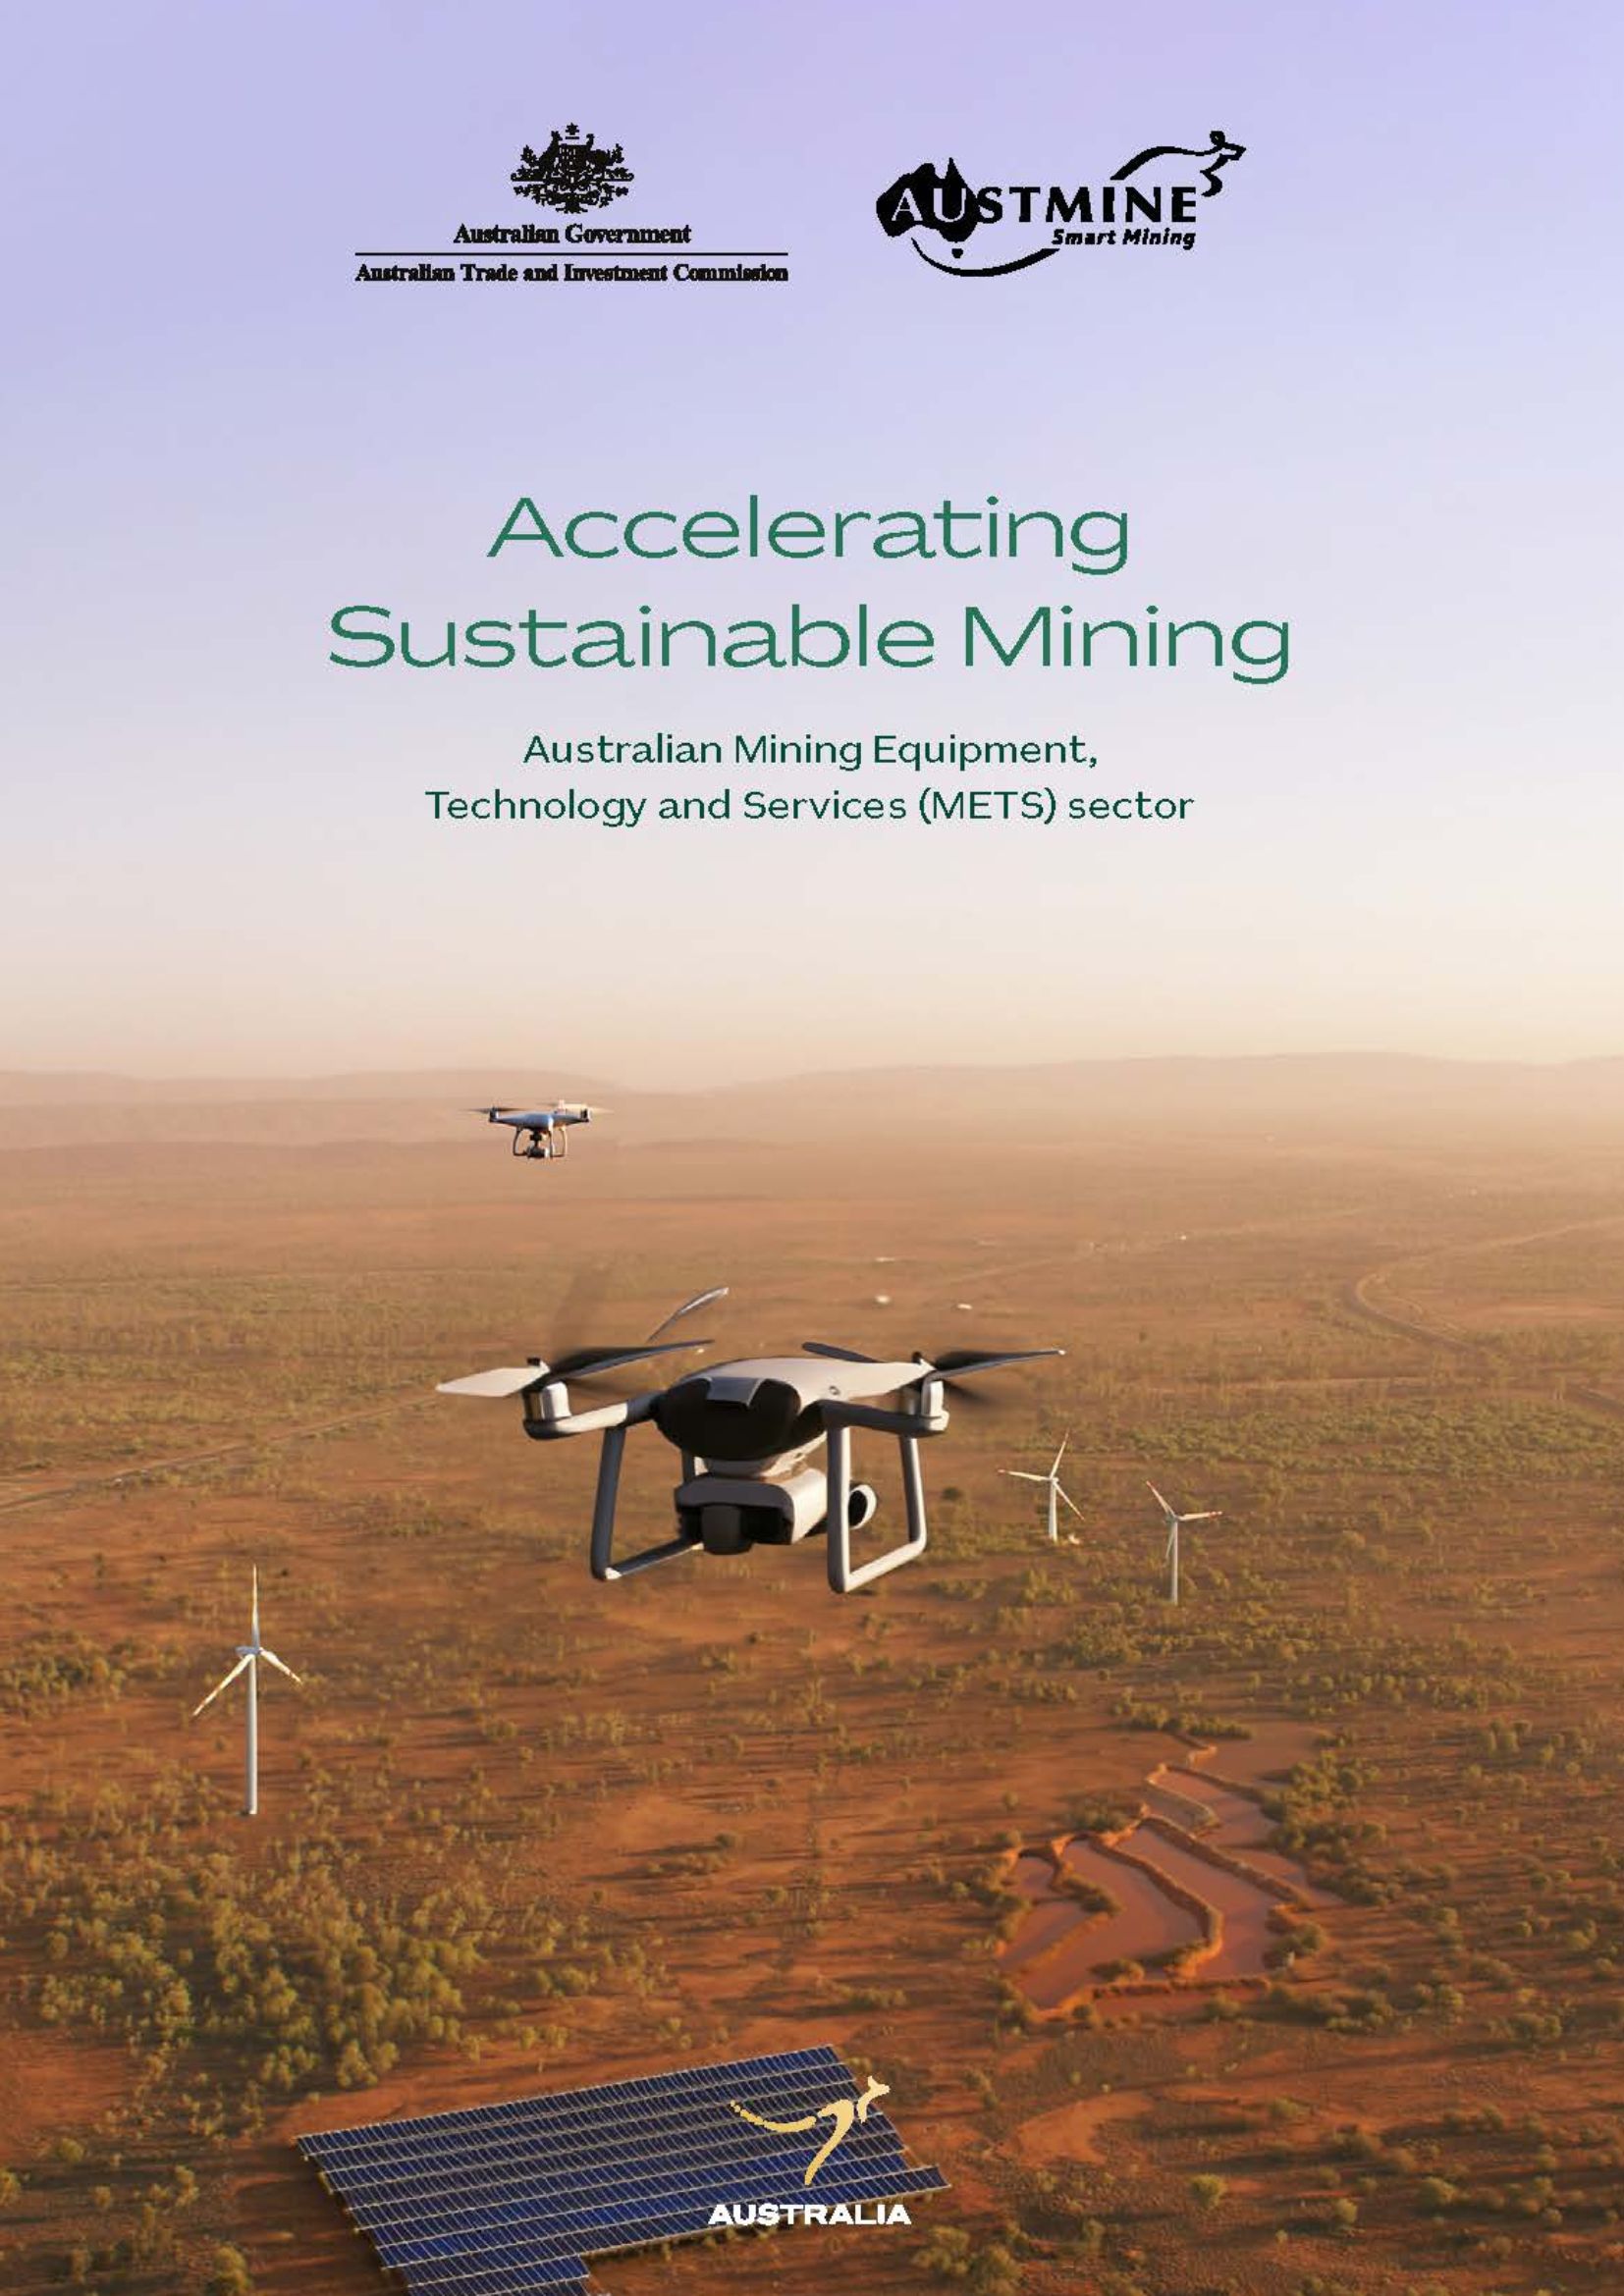 Accelerating Sustainable Mining cover showing a drone flying over The Outback